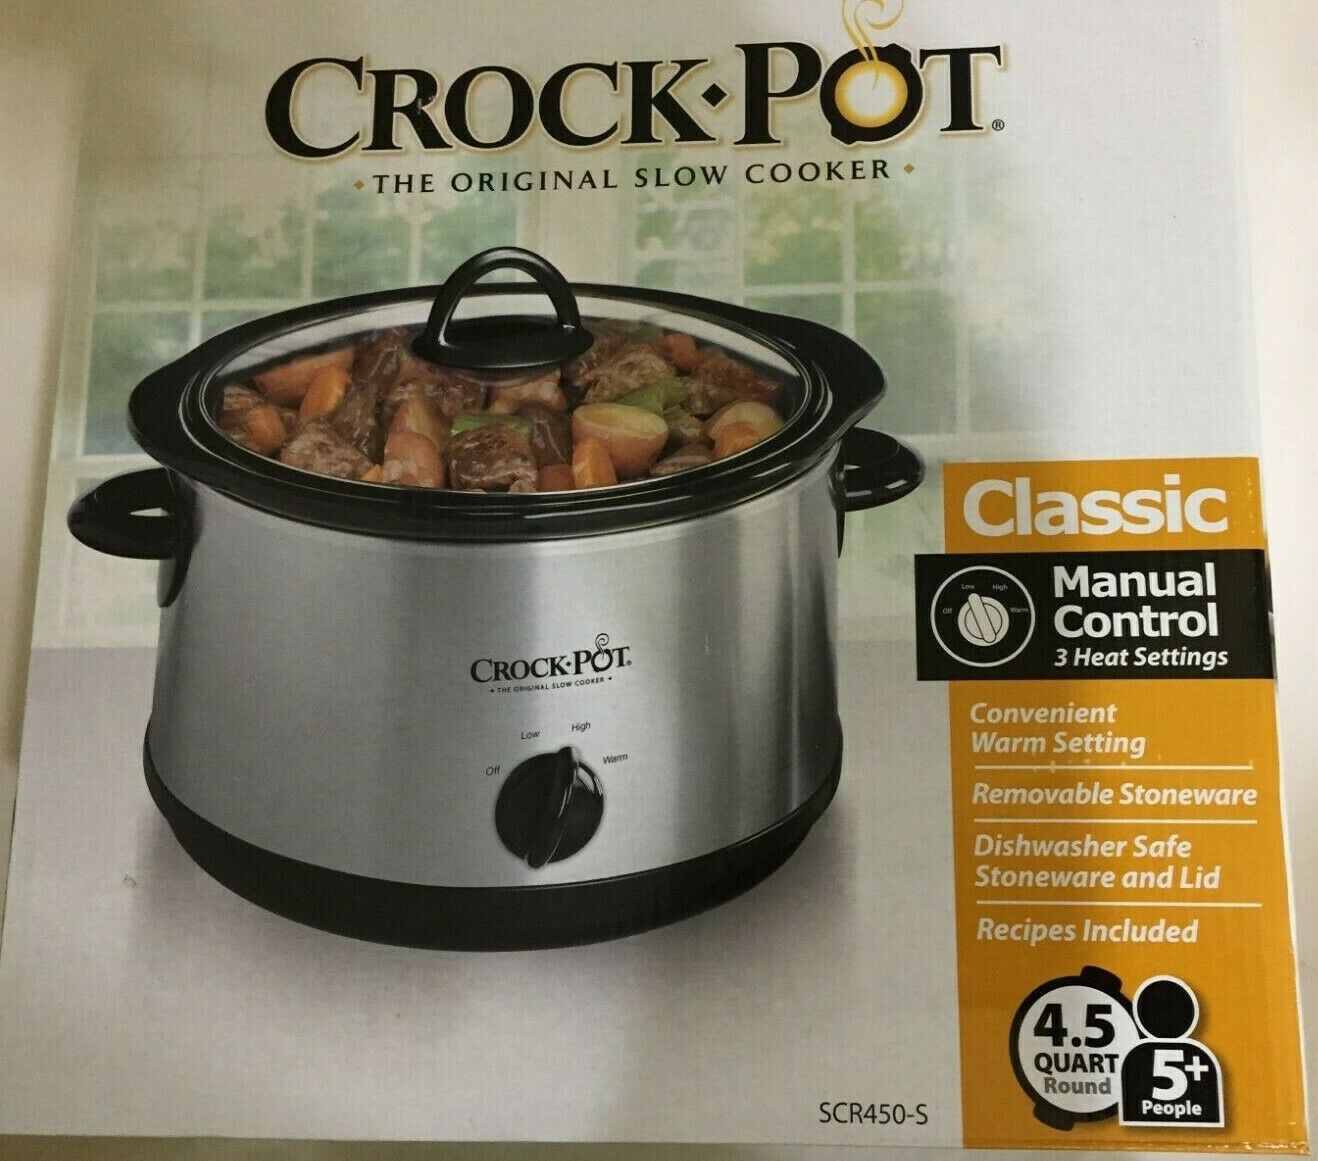 Crock pot slow cooker healthy retail $37 for $20 the big model SCR450-S